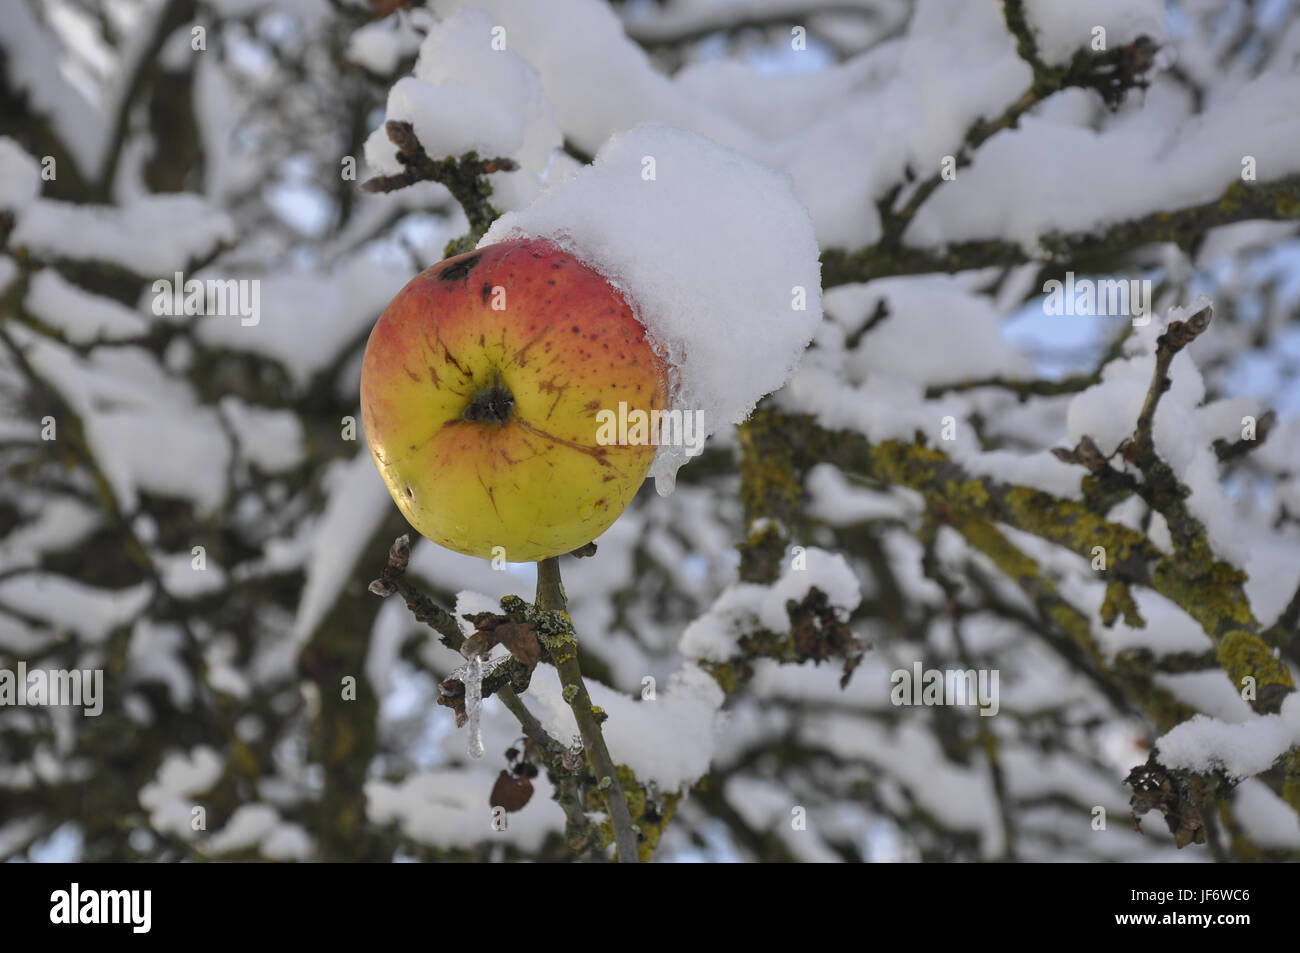 Apples covered with snow, Germany Stock Photo